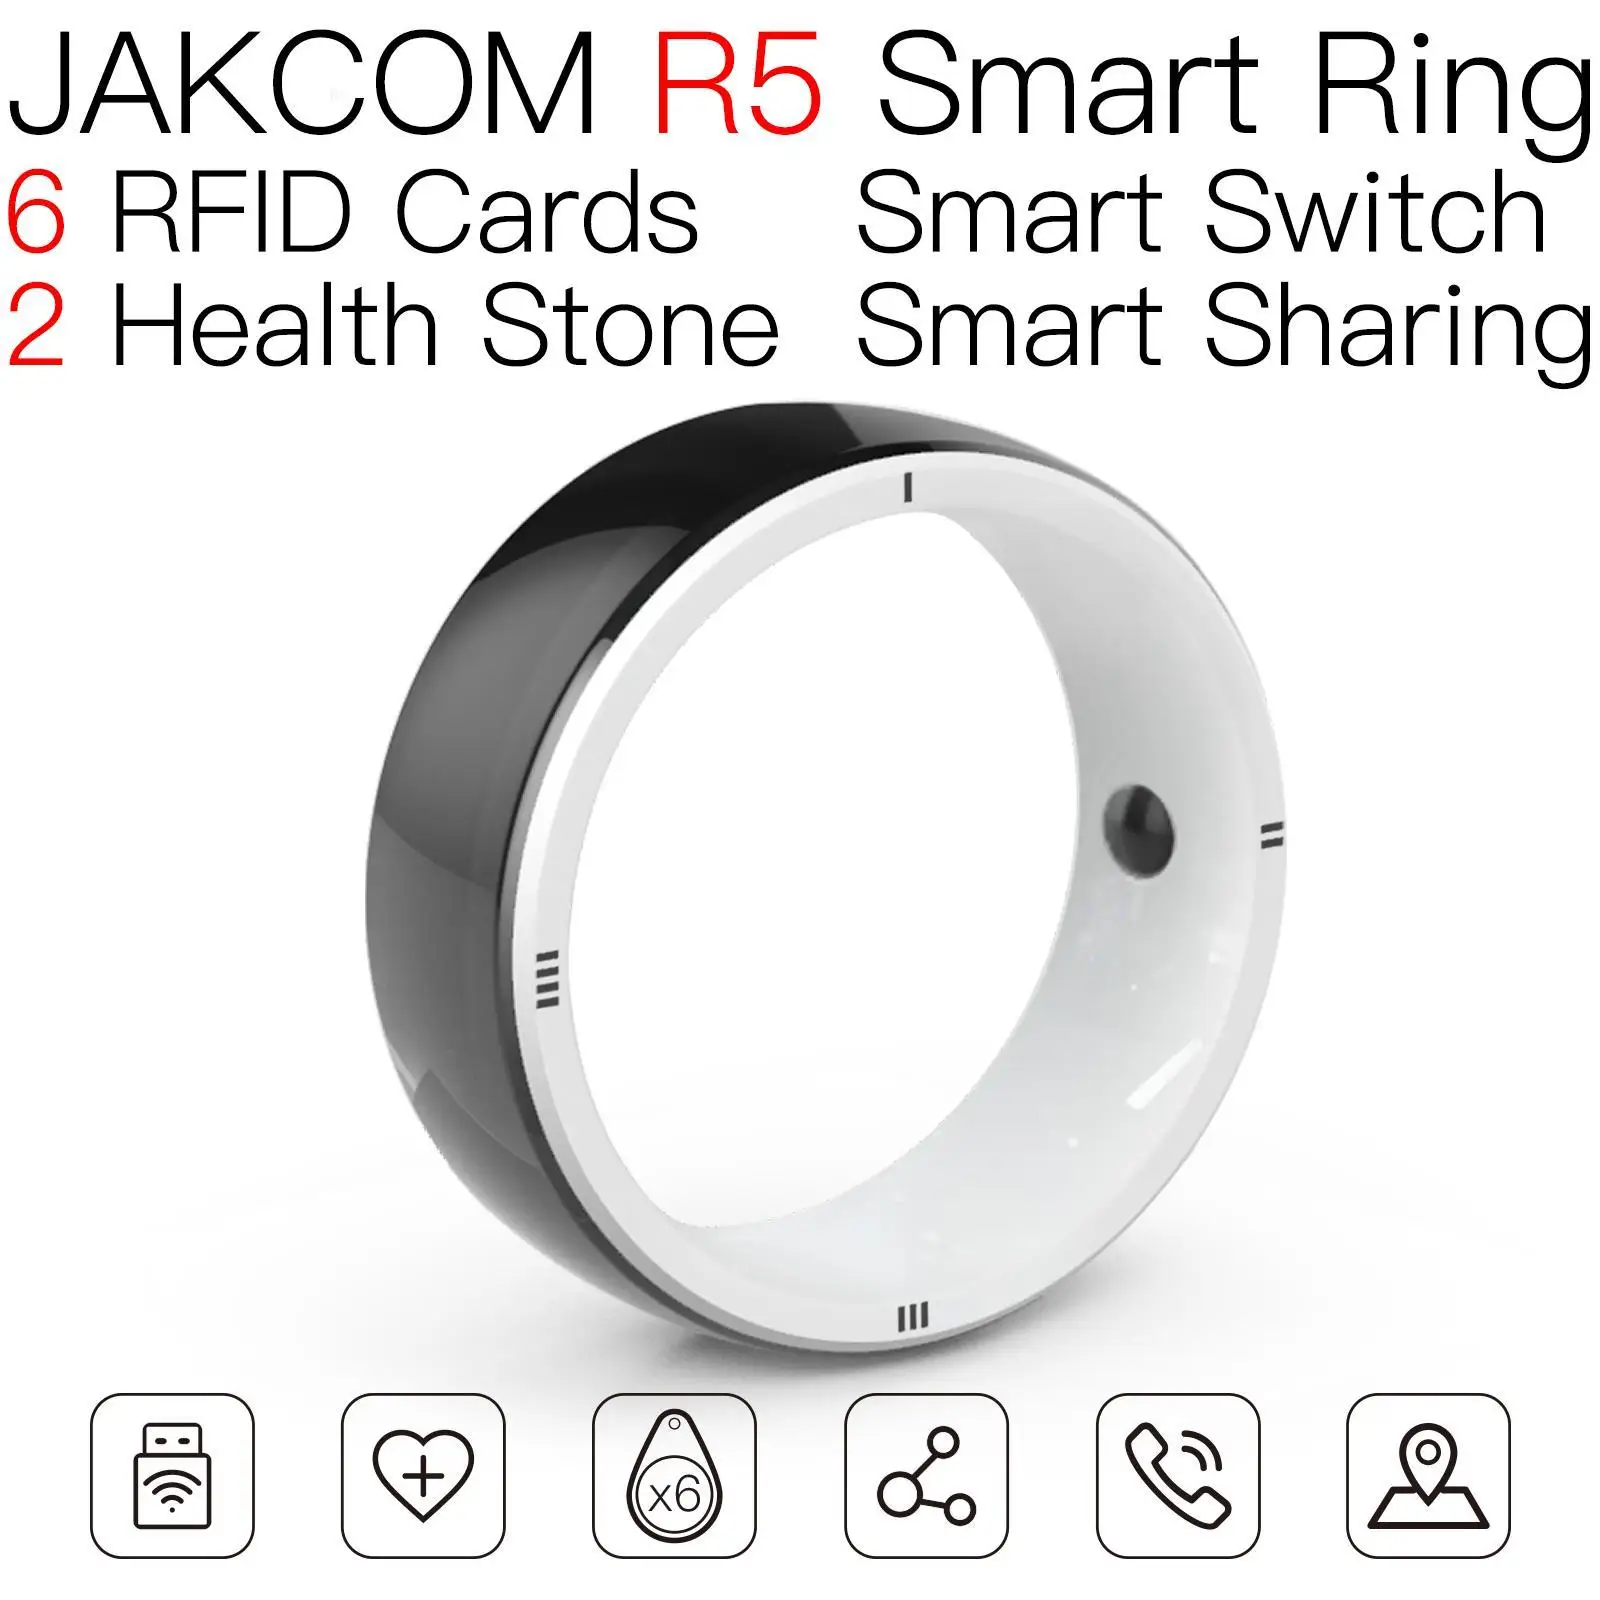 

JAKCOM R5 Smart Ring Super value than nfc paper cards tag 125 code smarters tv xtream ntag 215 card blank rfid amino stag esp32